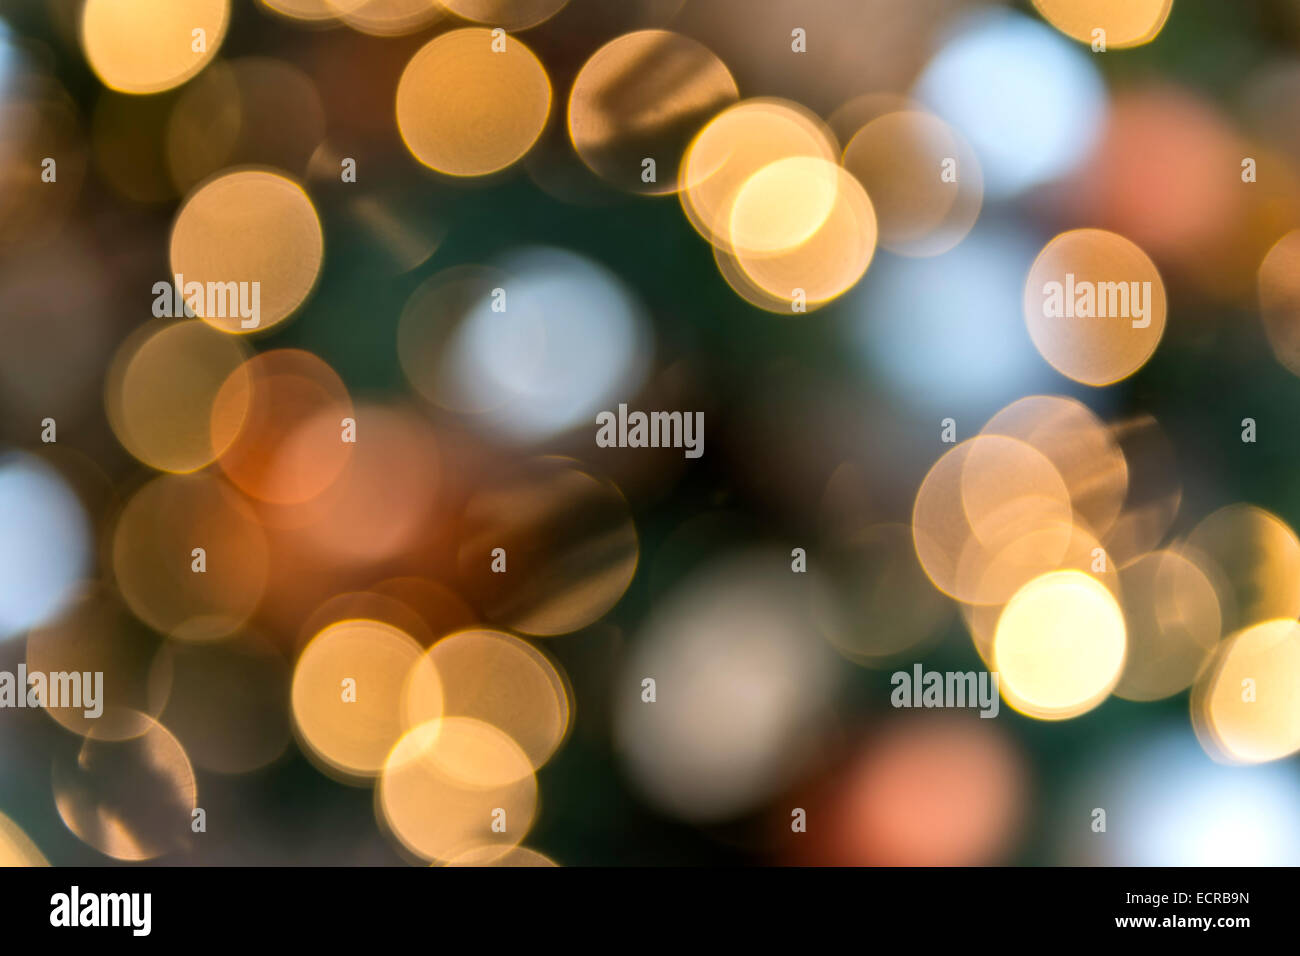 image of bokeh with colors yellow, gold red and green Stock Photo